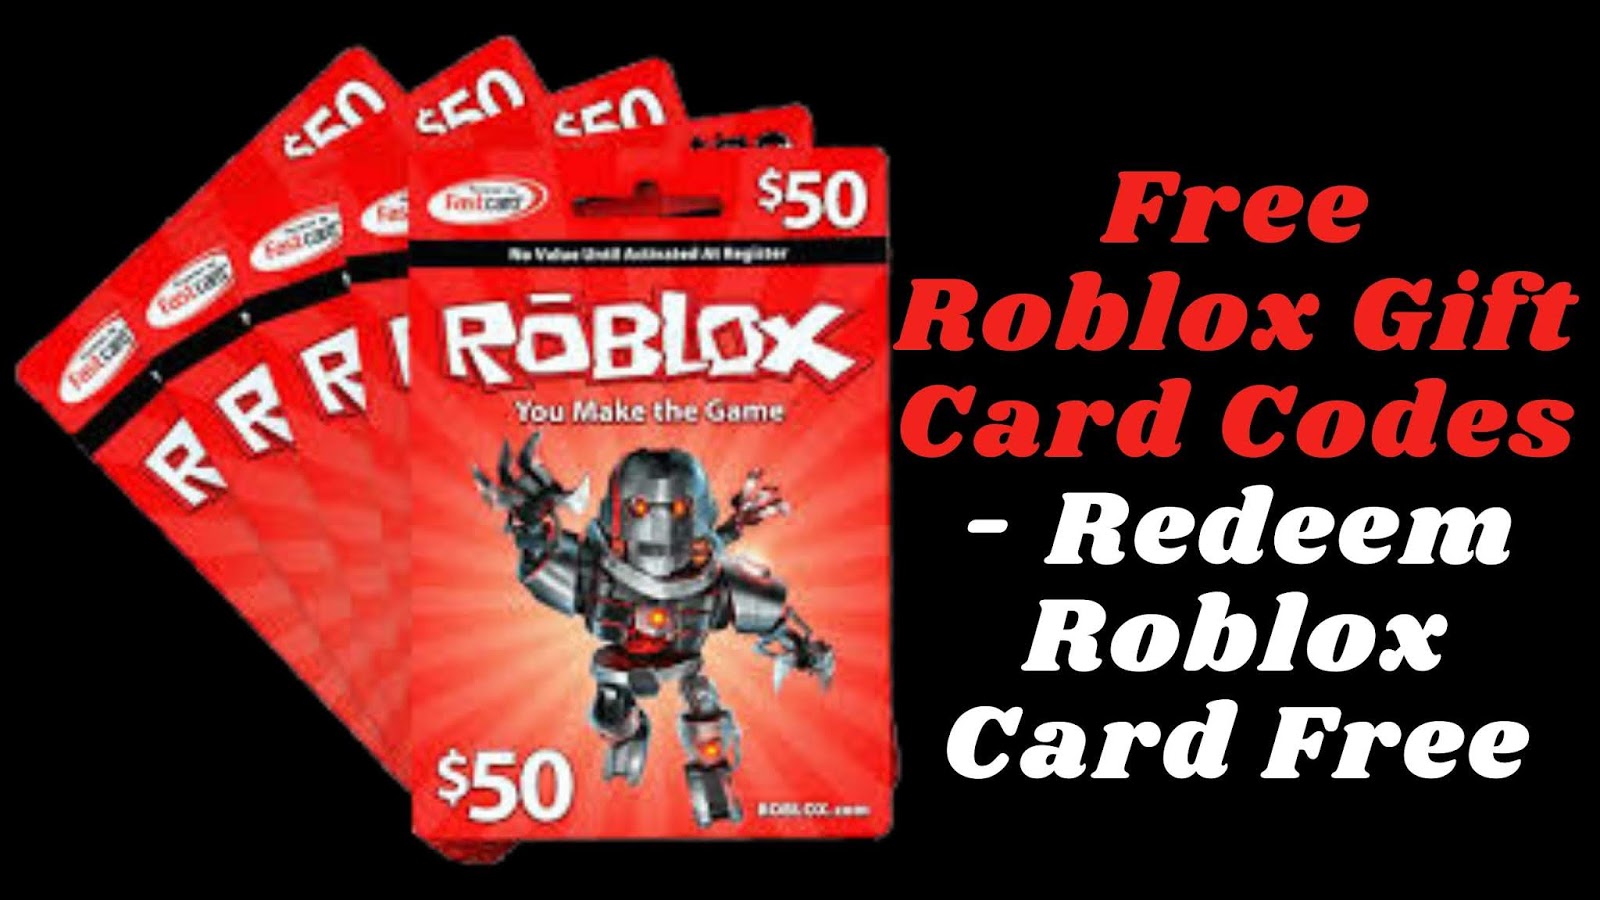 Free Gift Cards Free Roblox Gift Card Codes Redeem Roblox Card Free - roblox gift card codes free robux codes 2020